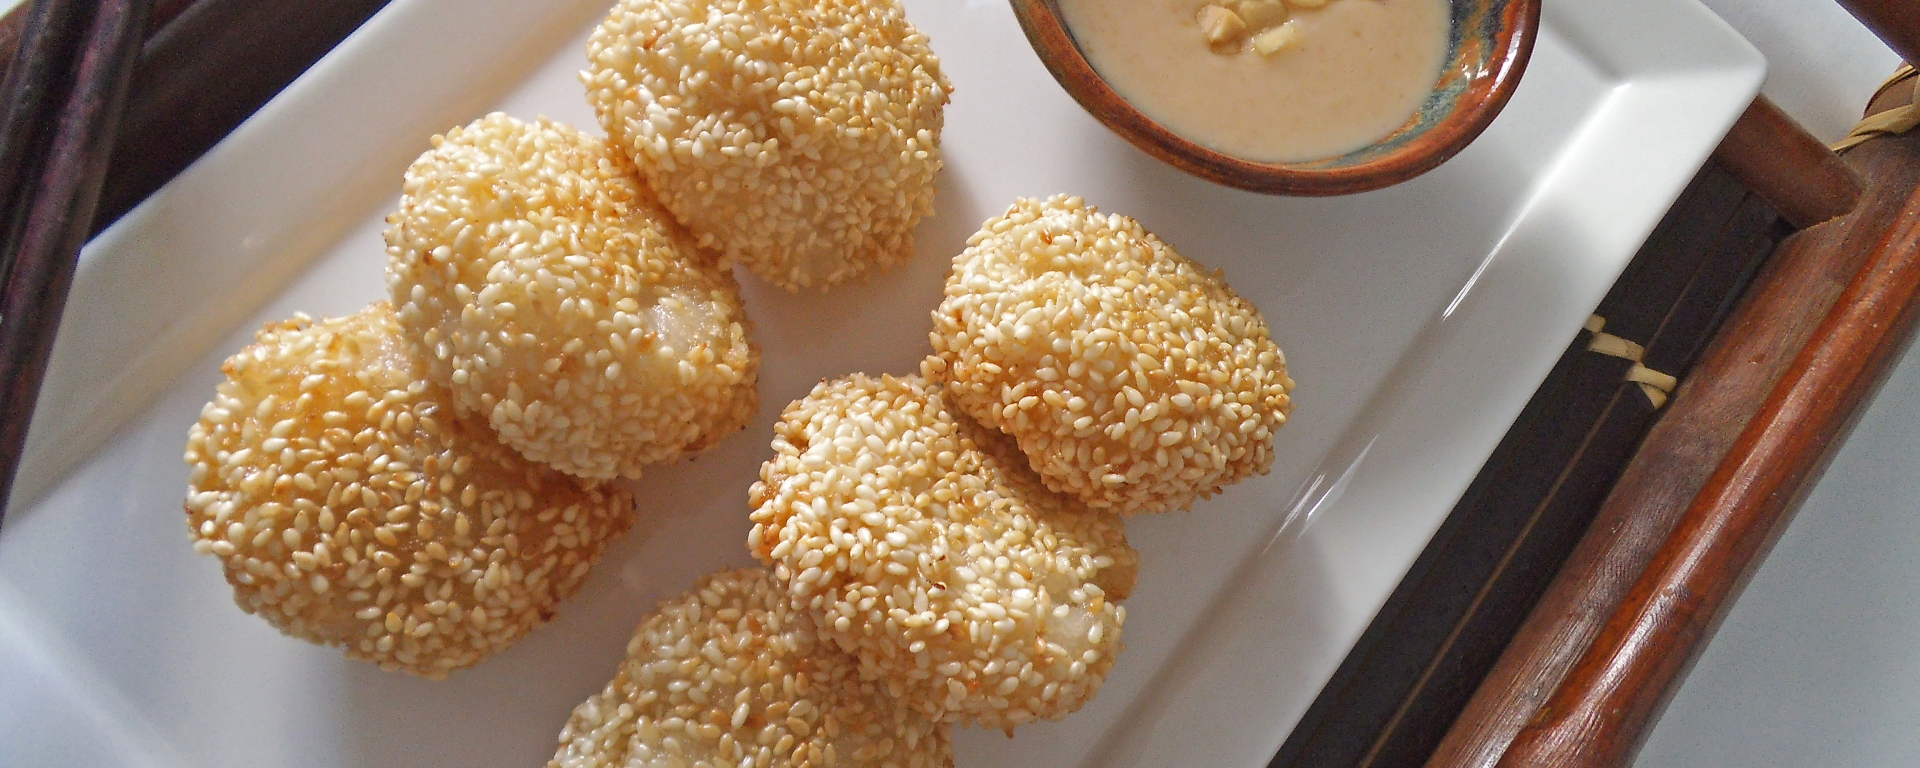 13 Unique Ways To Use Sesame Seeds You May Not Have Thought Of